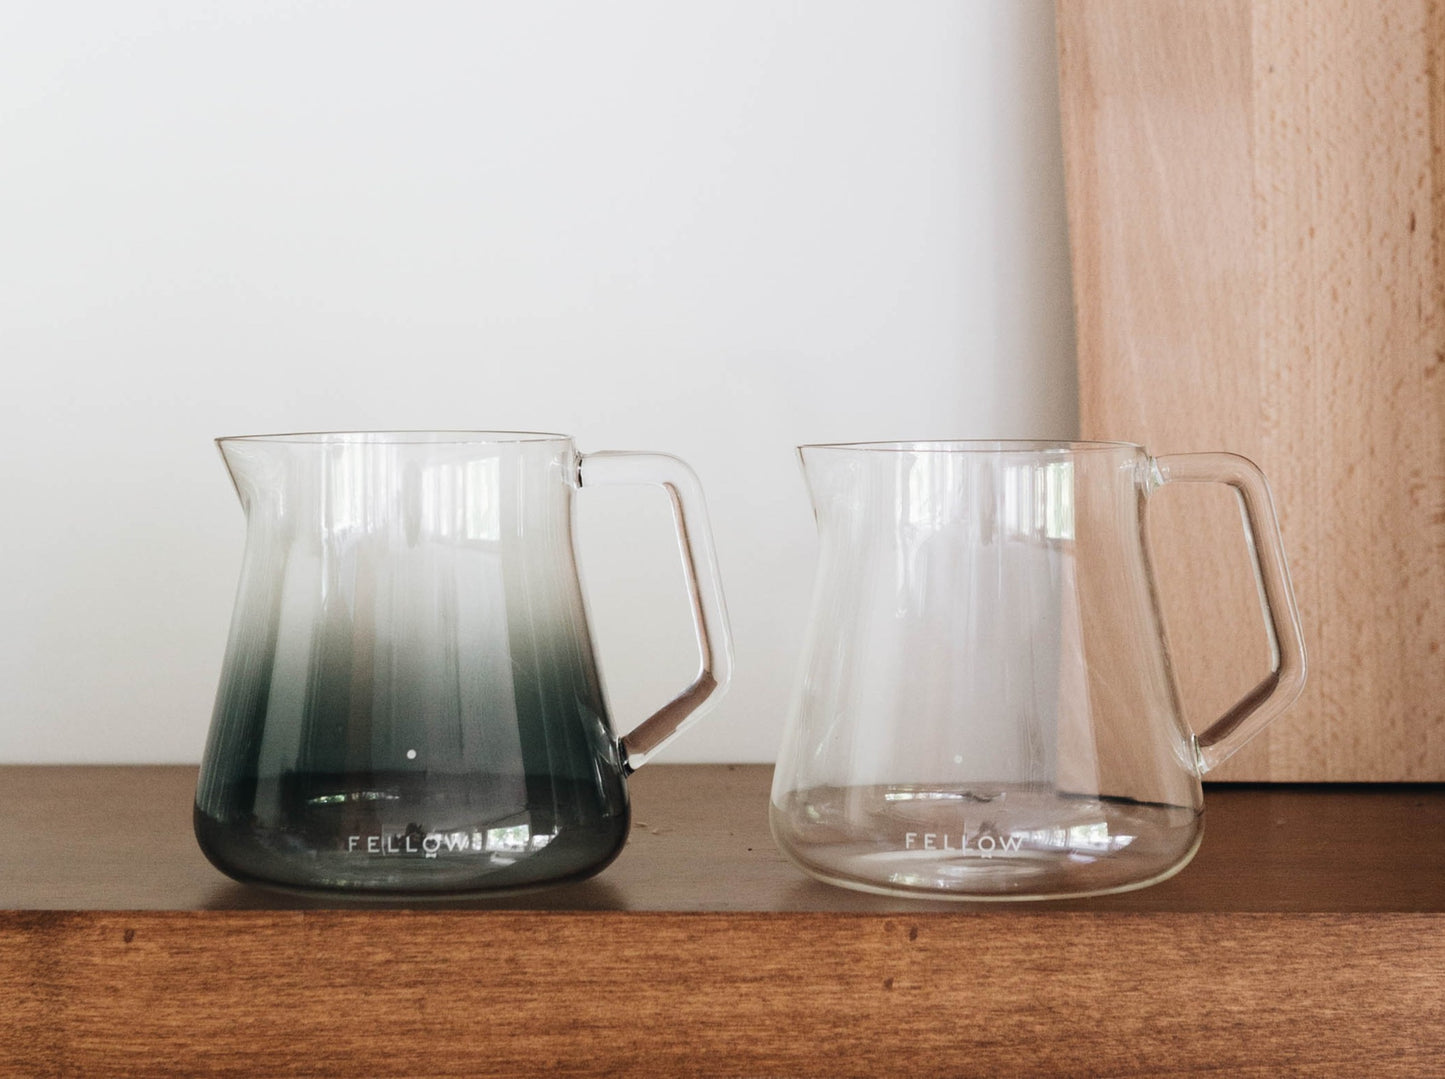 Load image into Gallery viewer, Mighty Glass Carafe | Fellow
